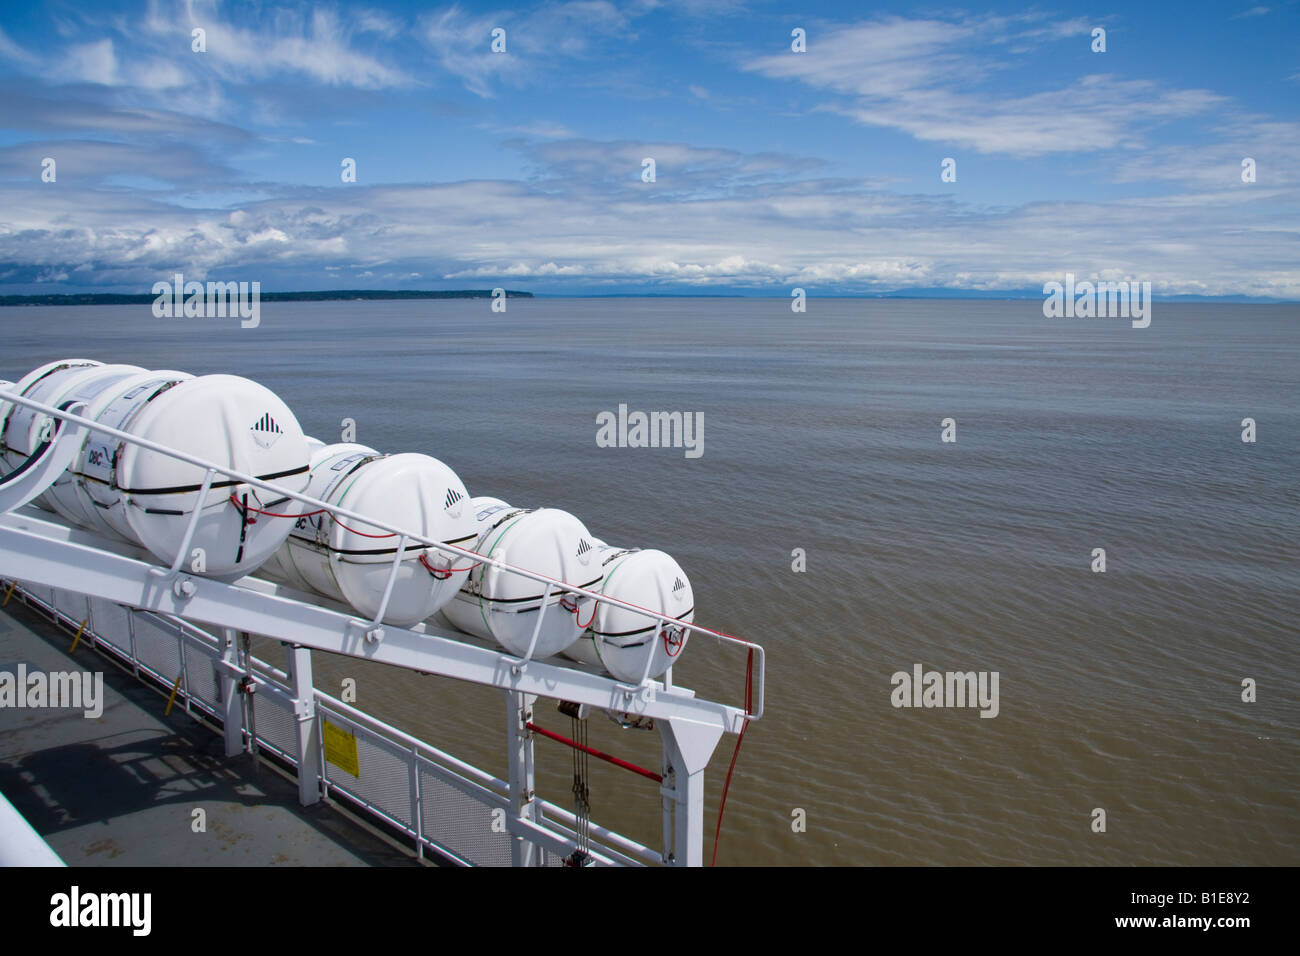 Inflatable liferafts in hard-shelled canister on a passenger ferry Stock Photo